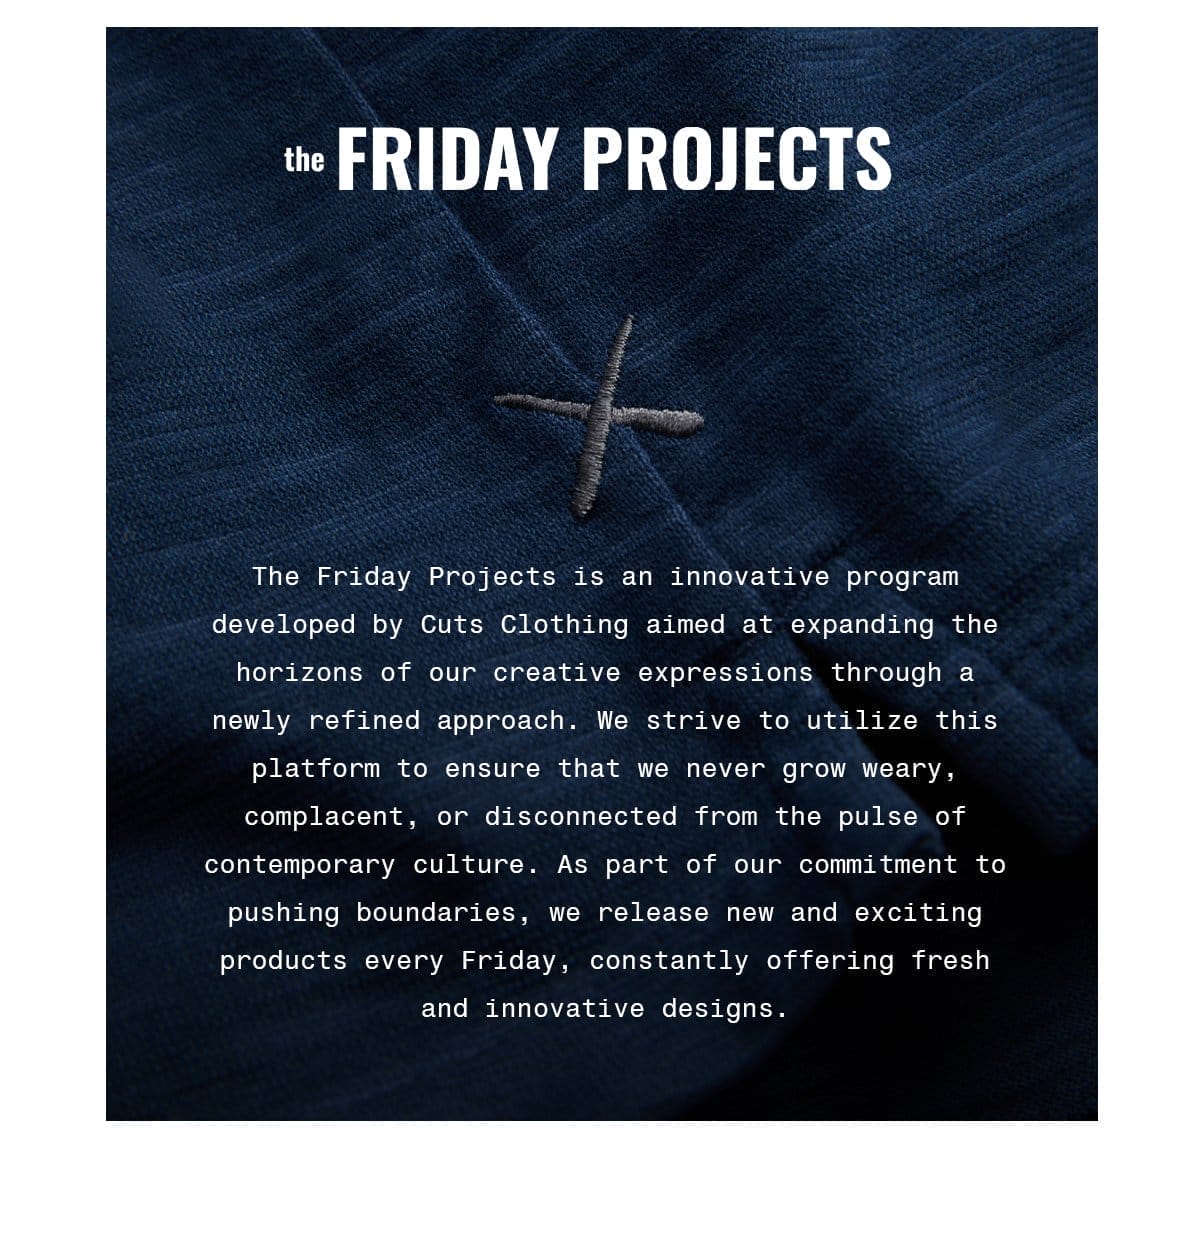 The Friday Projects